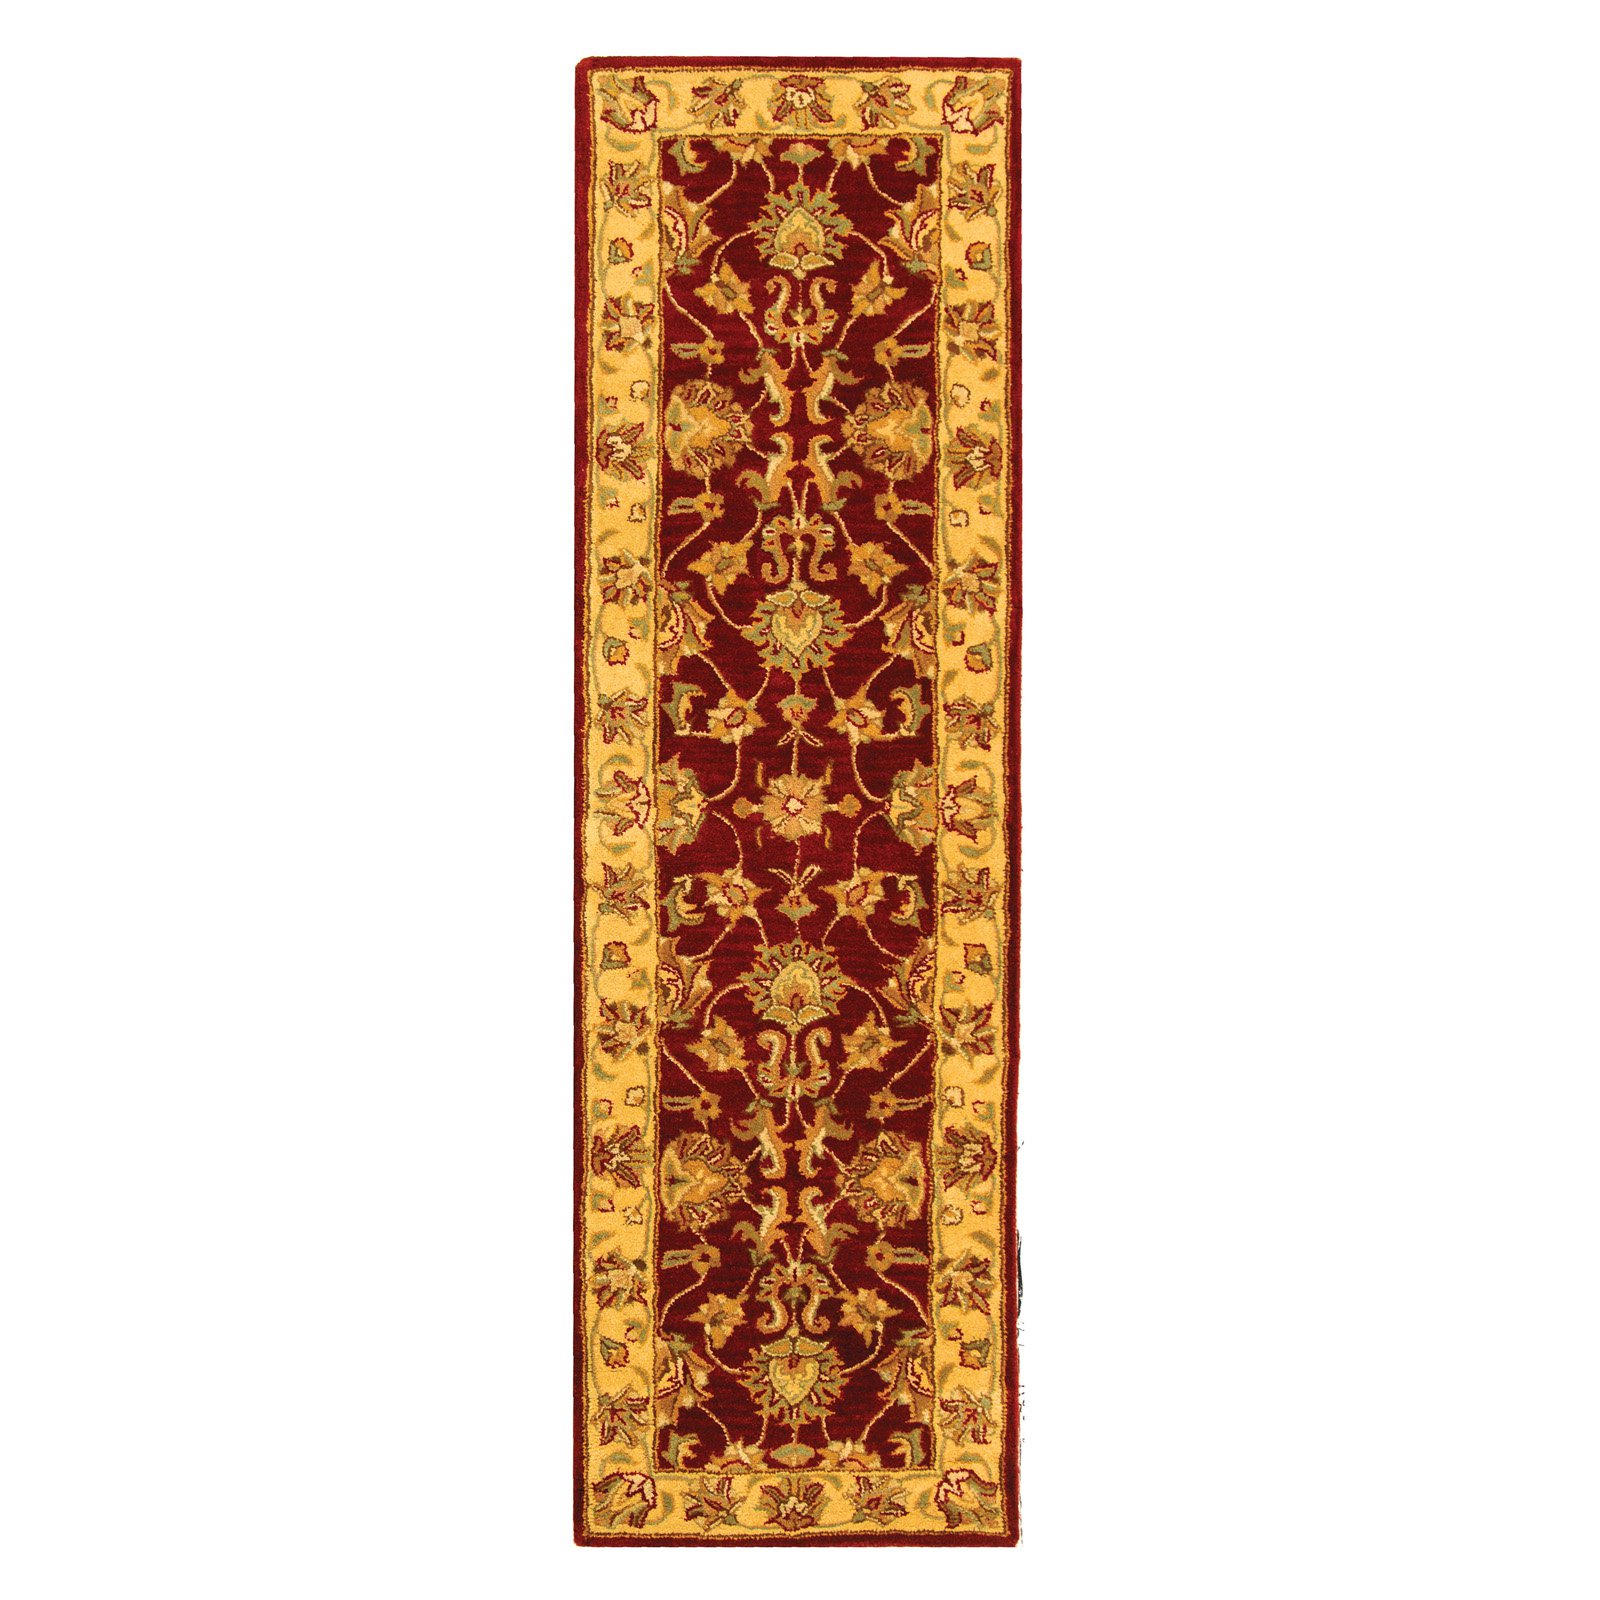 SAFAVIEH Heritage Regis Traditional Wool Area Rug, Red/Gold, 7'6" x 9'6" - image 3 of 9